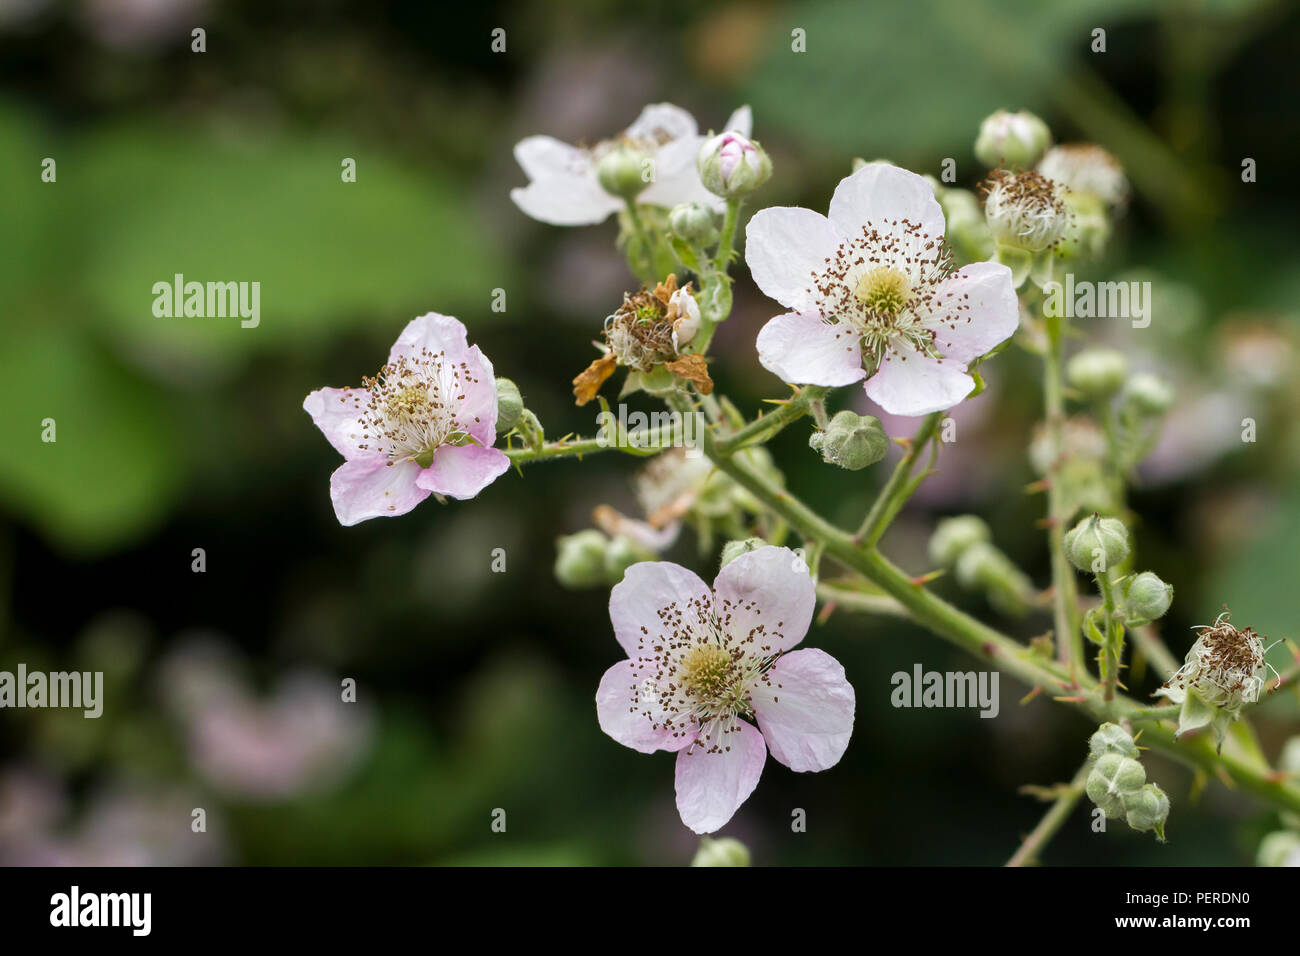 Flowering Bramble High Resolution Stock Photography and Images - Alamy